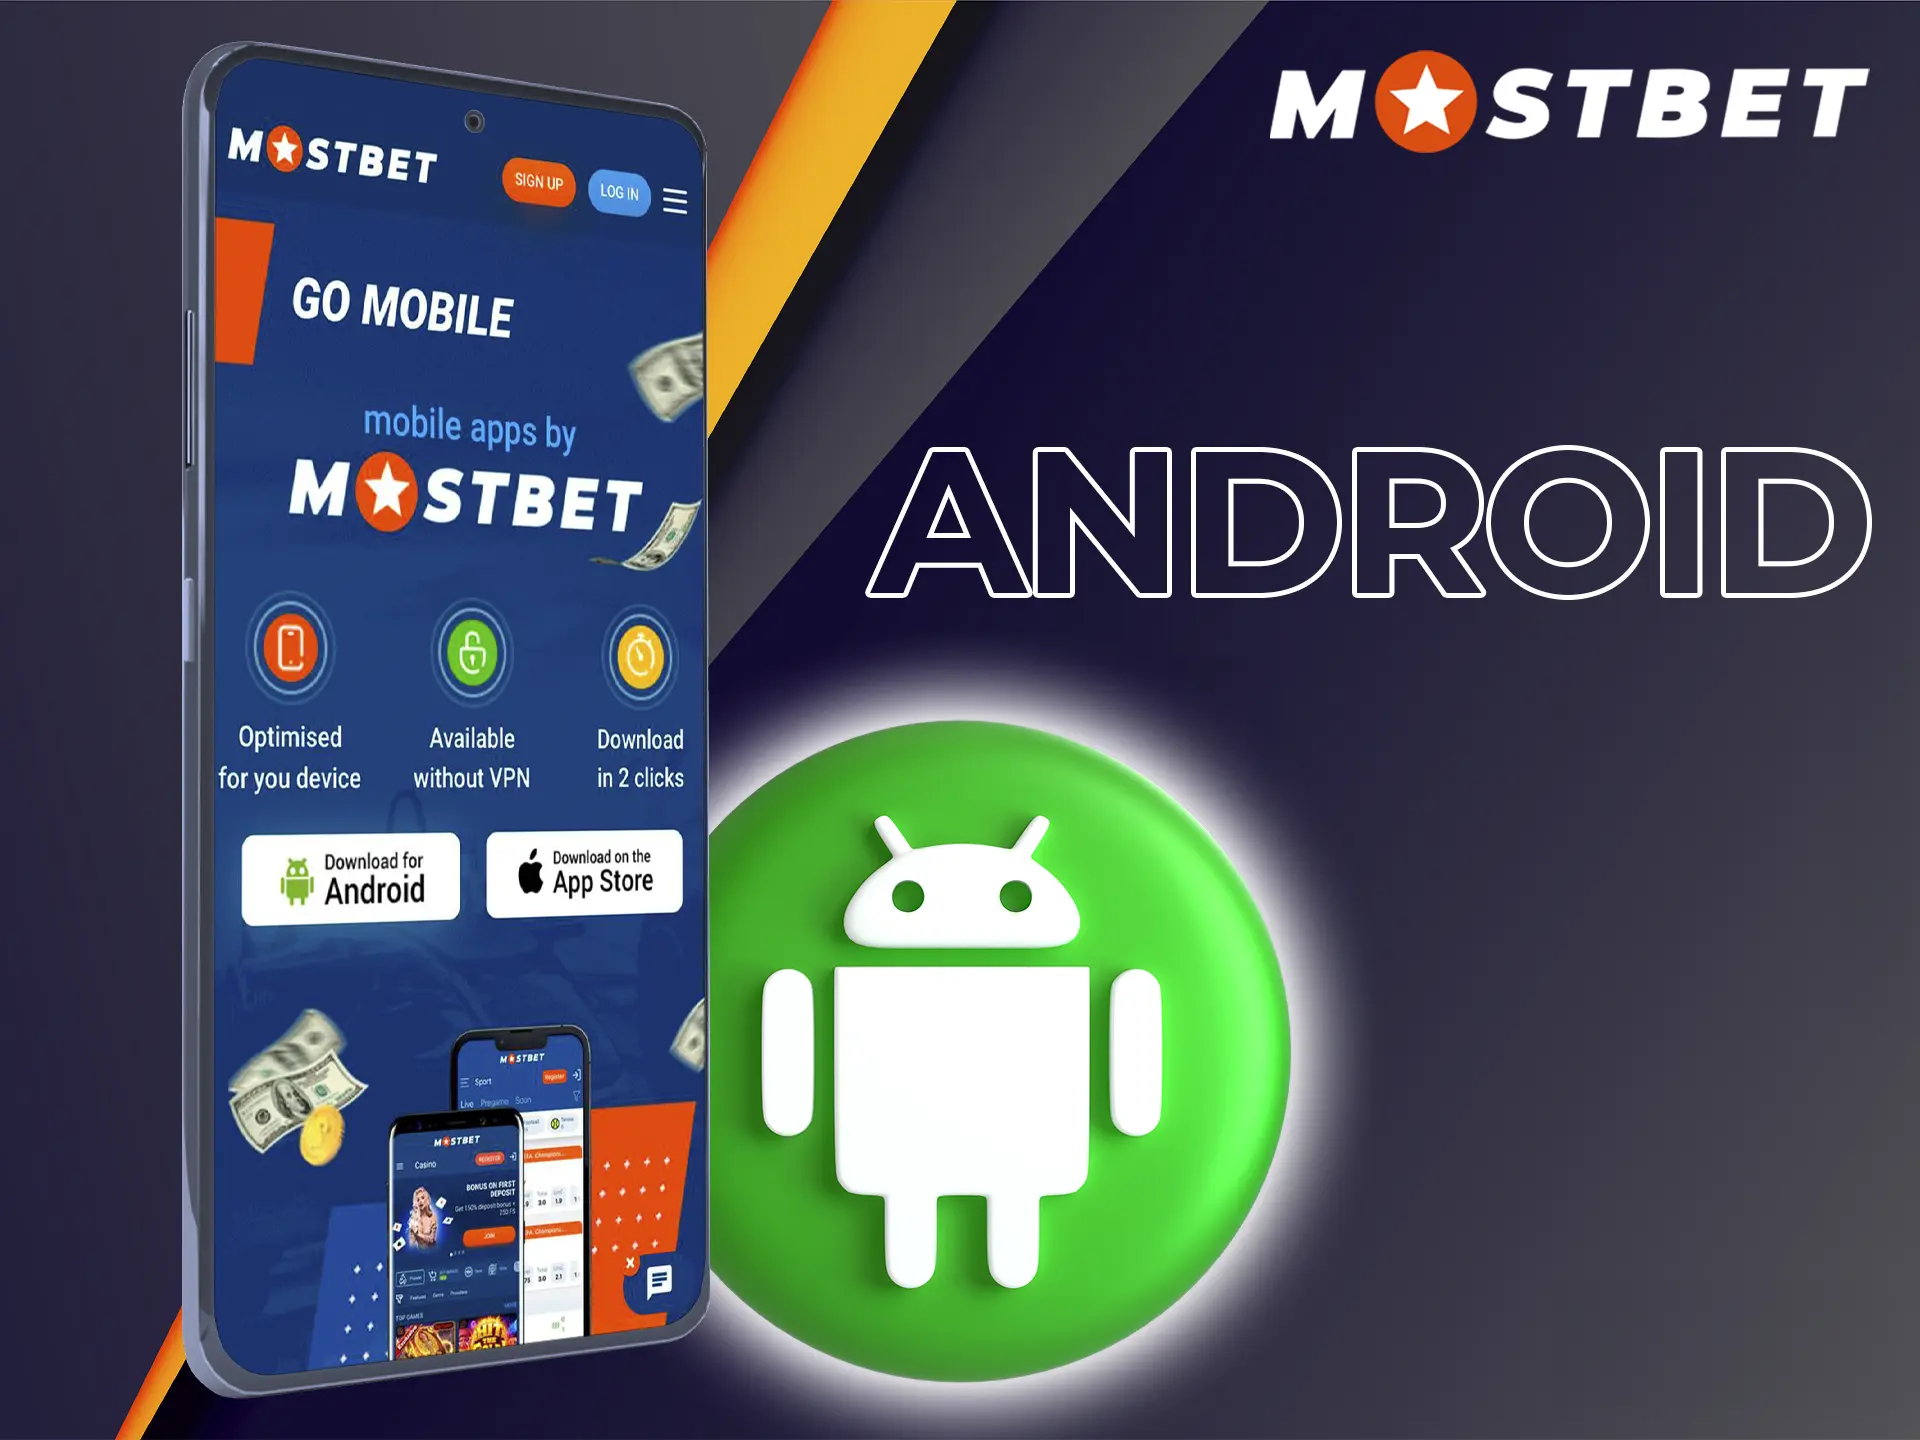 Download the Mostbet app for Android to have instant access to betting on the most high-profile football events.